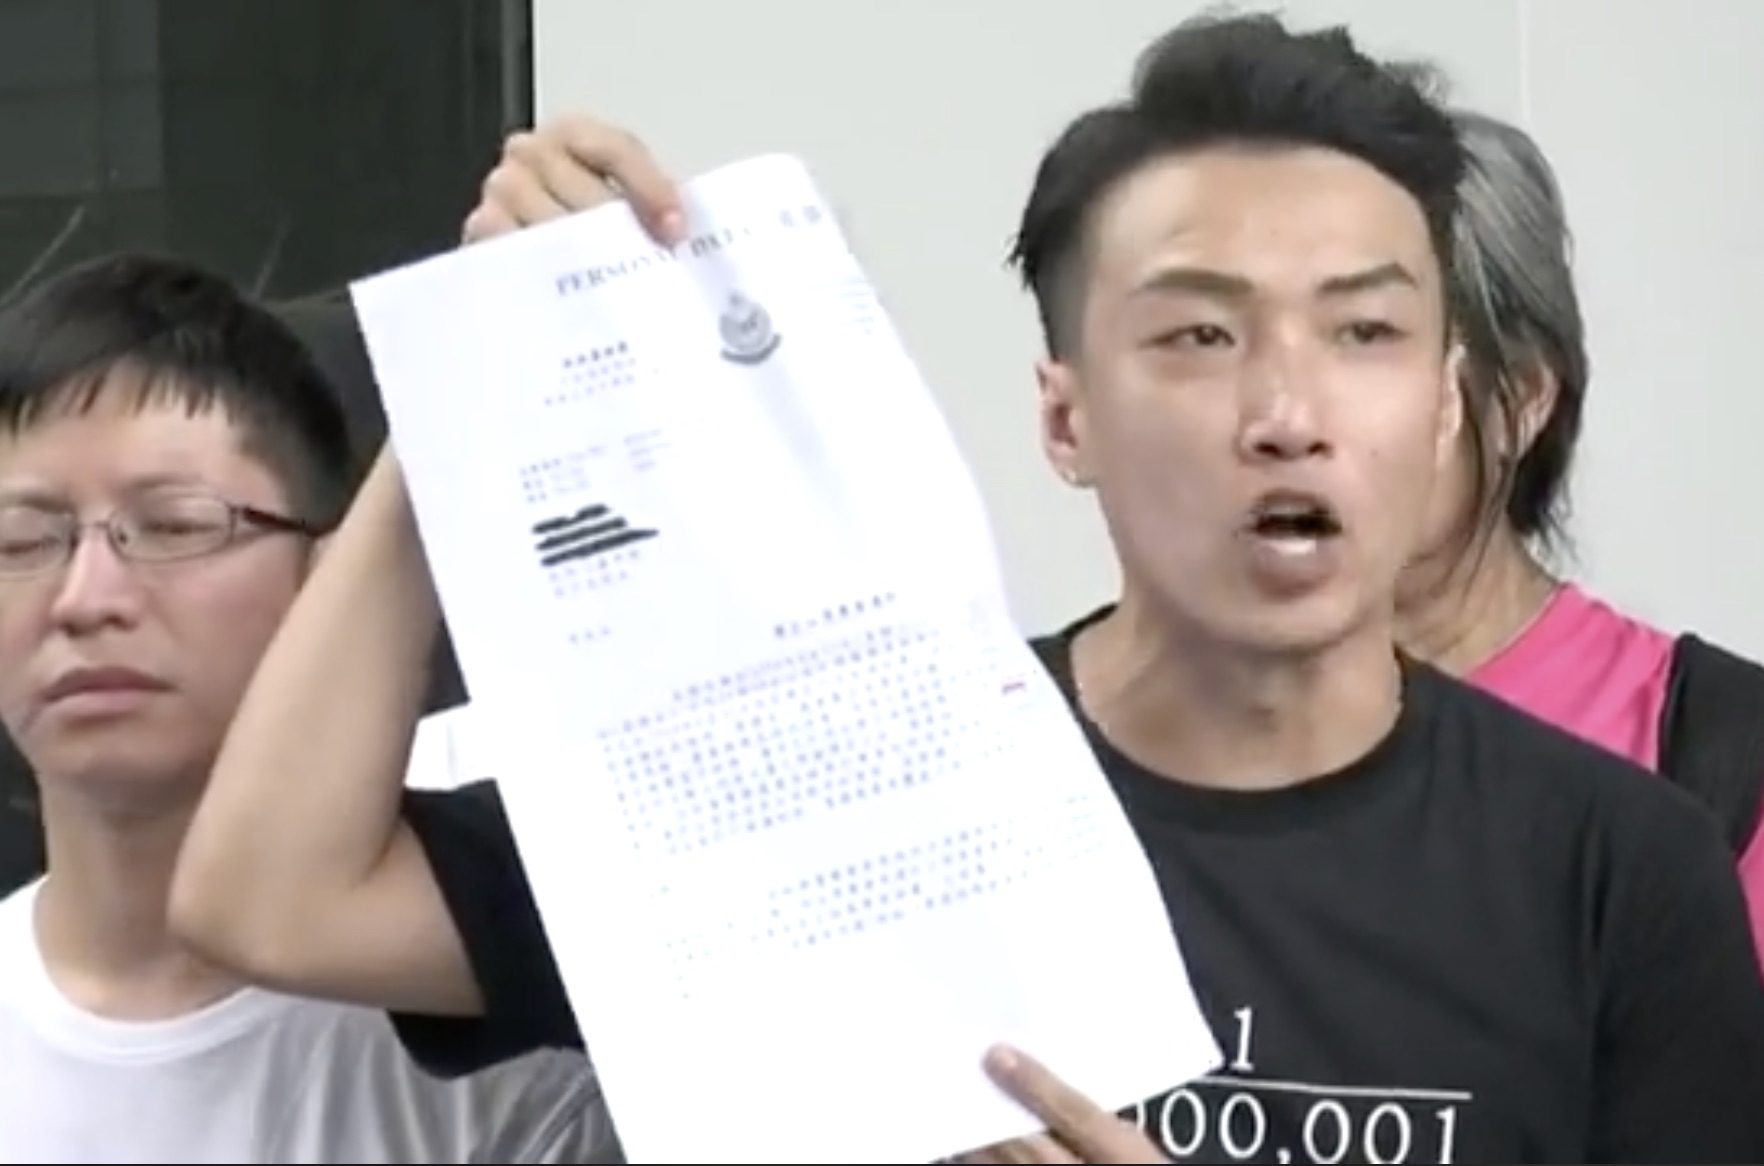 Jimmy Sham, the convenor of the Civil Human Rights Front, holds up a police letter of objection classifying the June 12 rally as a riot, and accused Carrie Lam of lying after she claimed in a press conference that they didn’t put a label on the protests. Screengrab via Facebook/RTHK video.